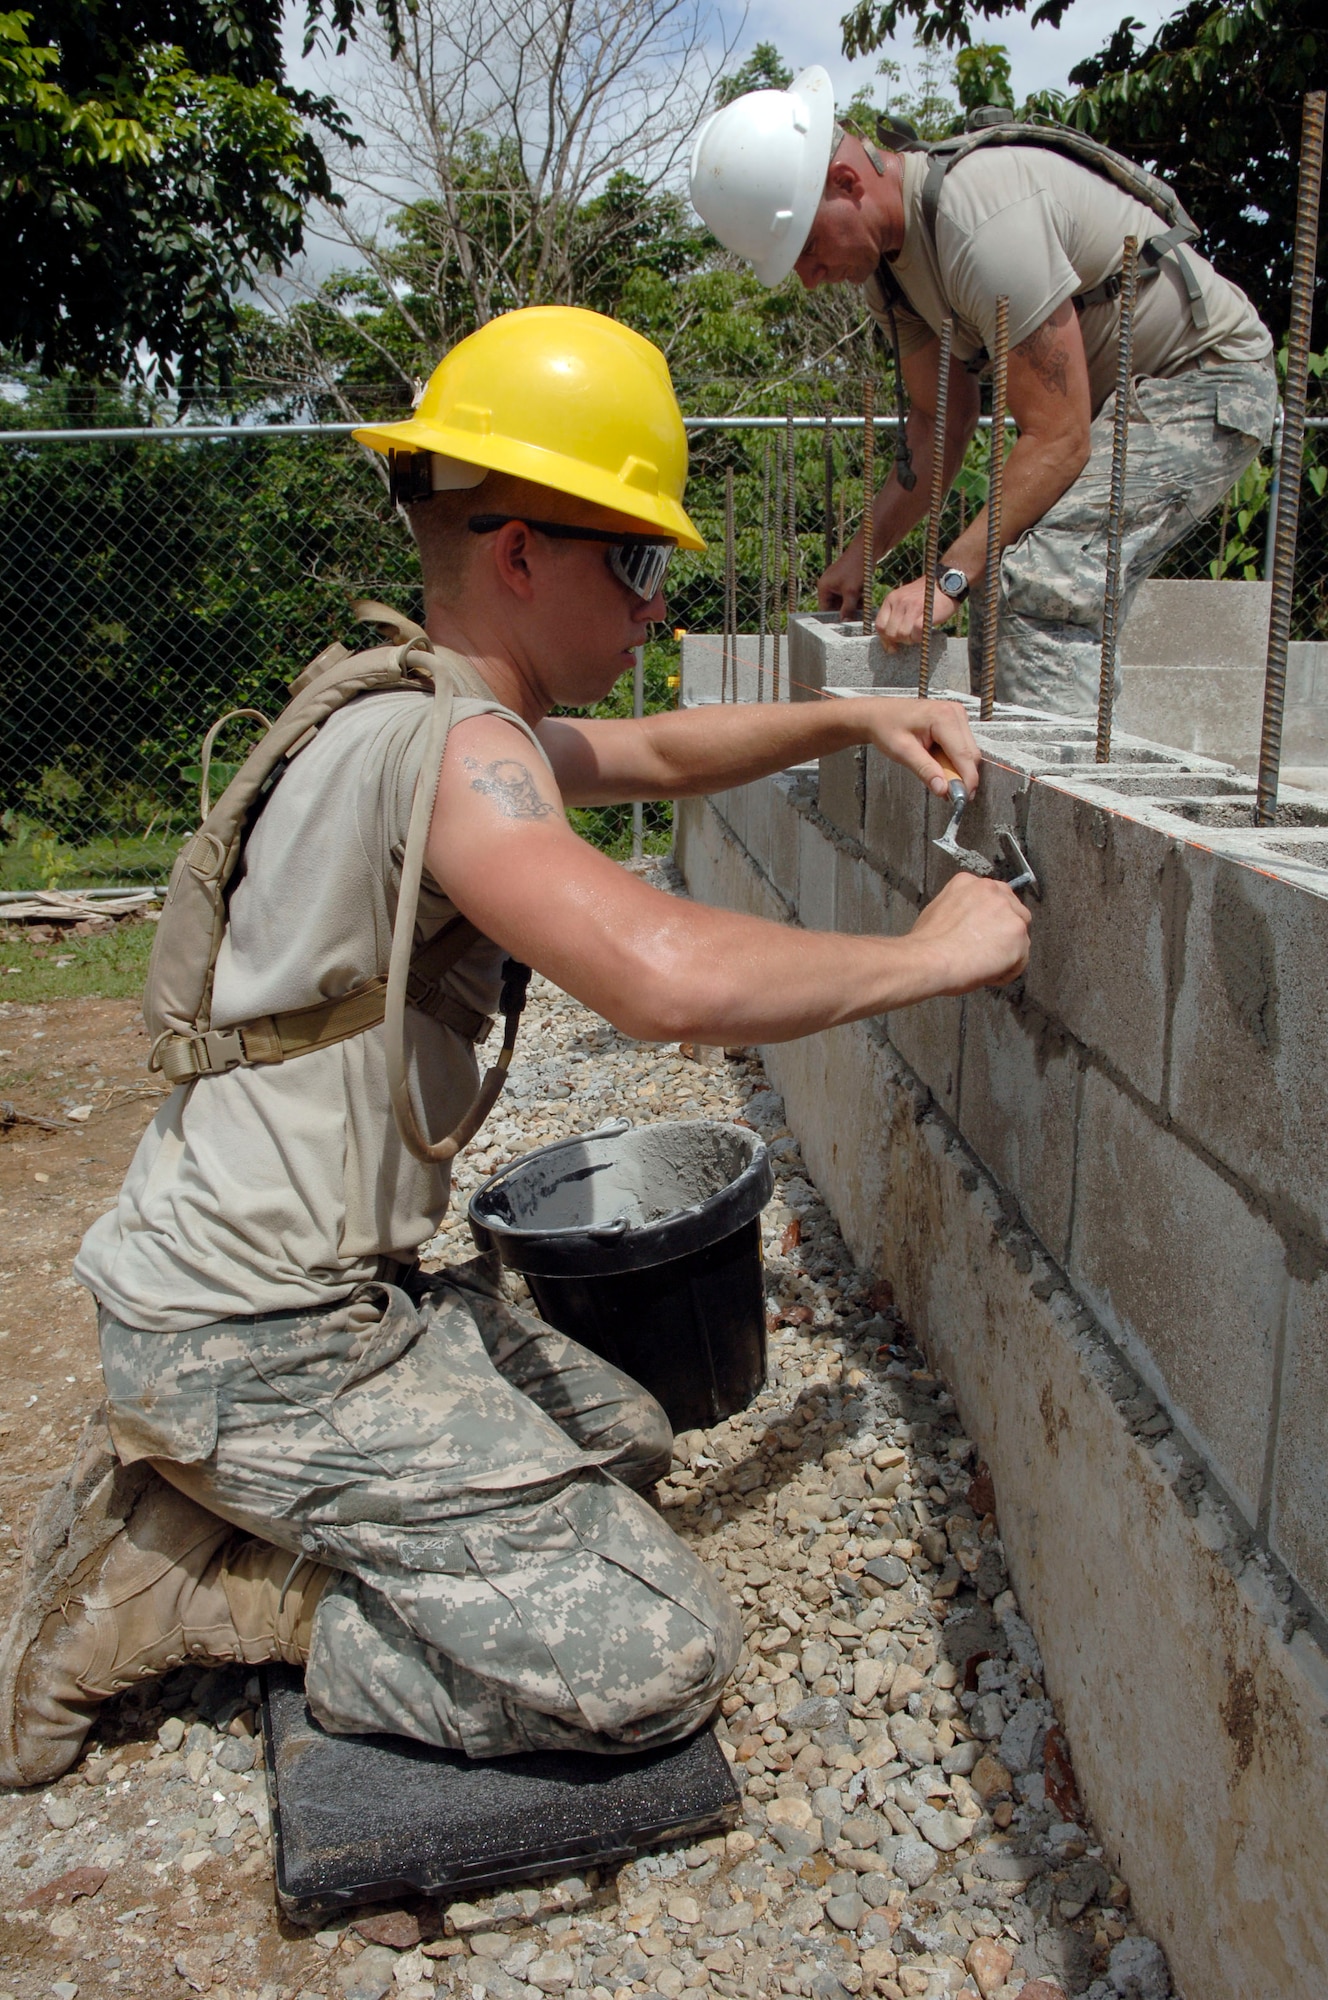 Spc. Kevin Schaeffer (left) and Sgt. Richard Fischer, construction engineers with the 372nd Engineer Company, mortar the first bricks into place June 26 at Santa Librada elementary school in Panama. The Army Reservists are deployed in support of New Horizons Panama 2010, a humanitarian assistance mission designed to strengthen partnerships between the United States and Panama. (U.S. Air Force photo/Tech. Sgt. Eric Petosky)